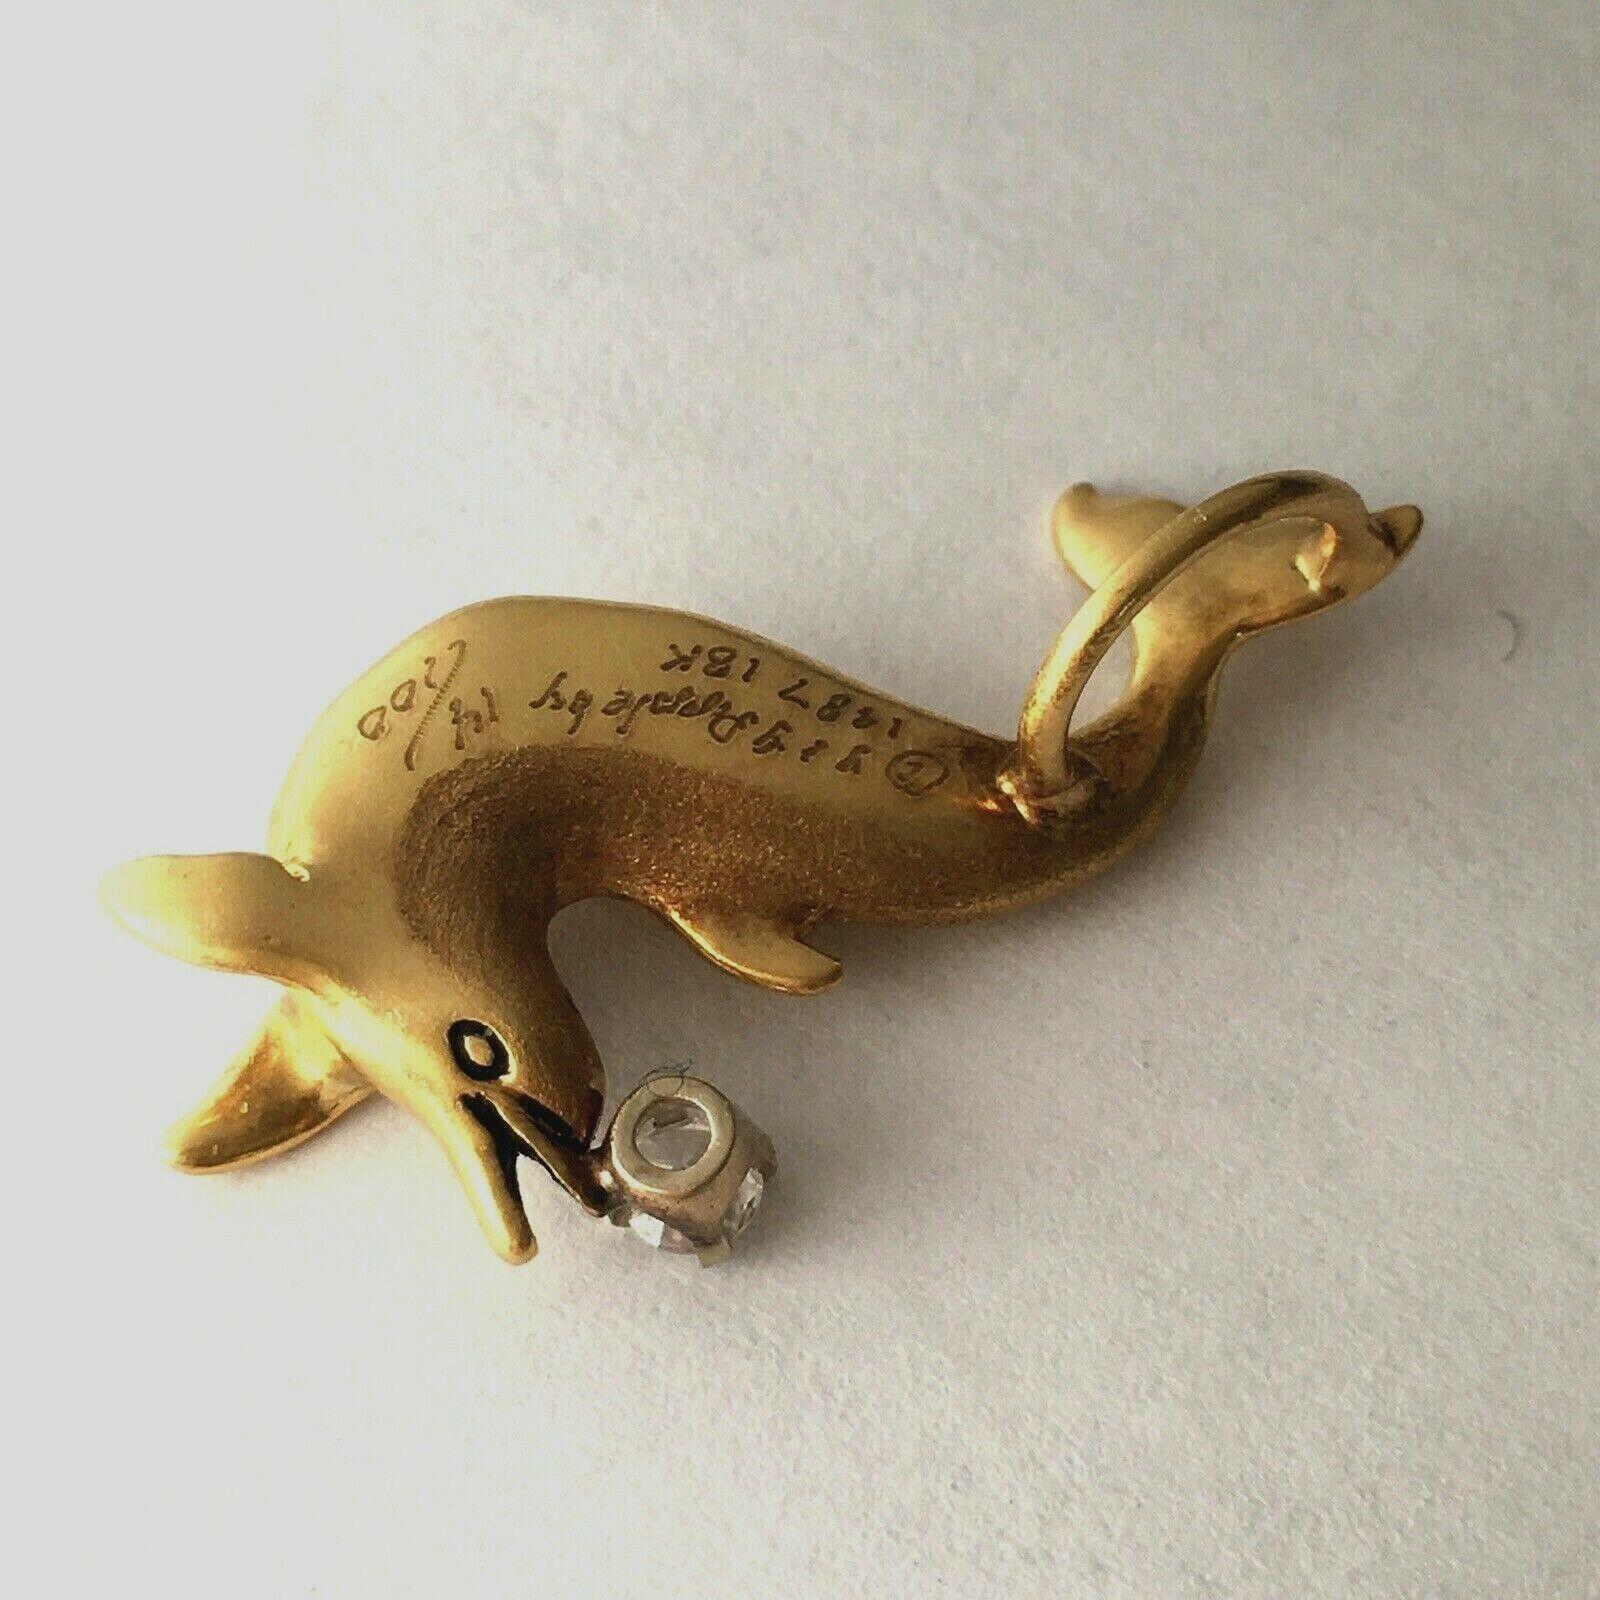 Gregory Appleby & Gayle Bright Playful Dolphin Pendent 
g & g Appleby 

Gregory A. Appleby Born in Van Nuys, Ca. He partnered with Gayle Bright and began sculpting precious metal jewelry. Their work has been featured in many galleries.  Gayle and